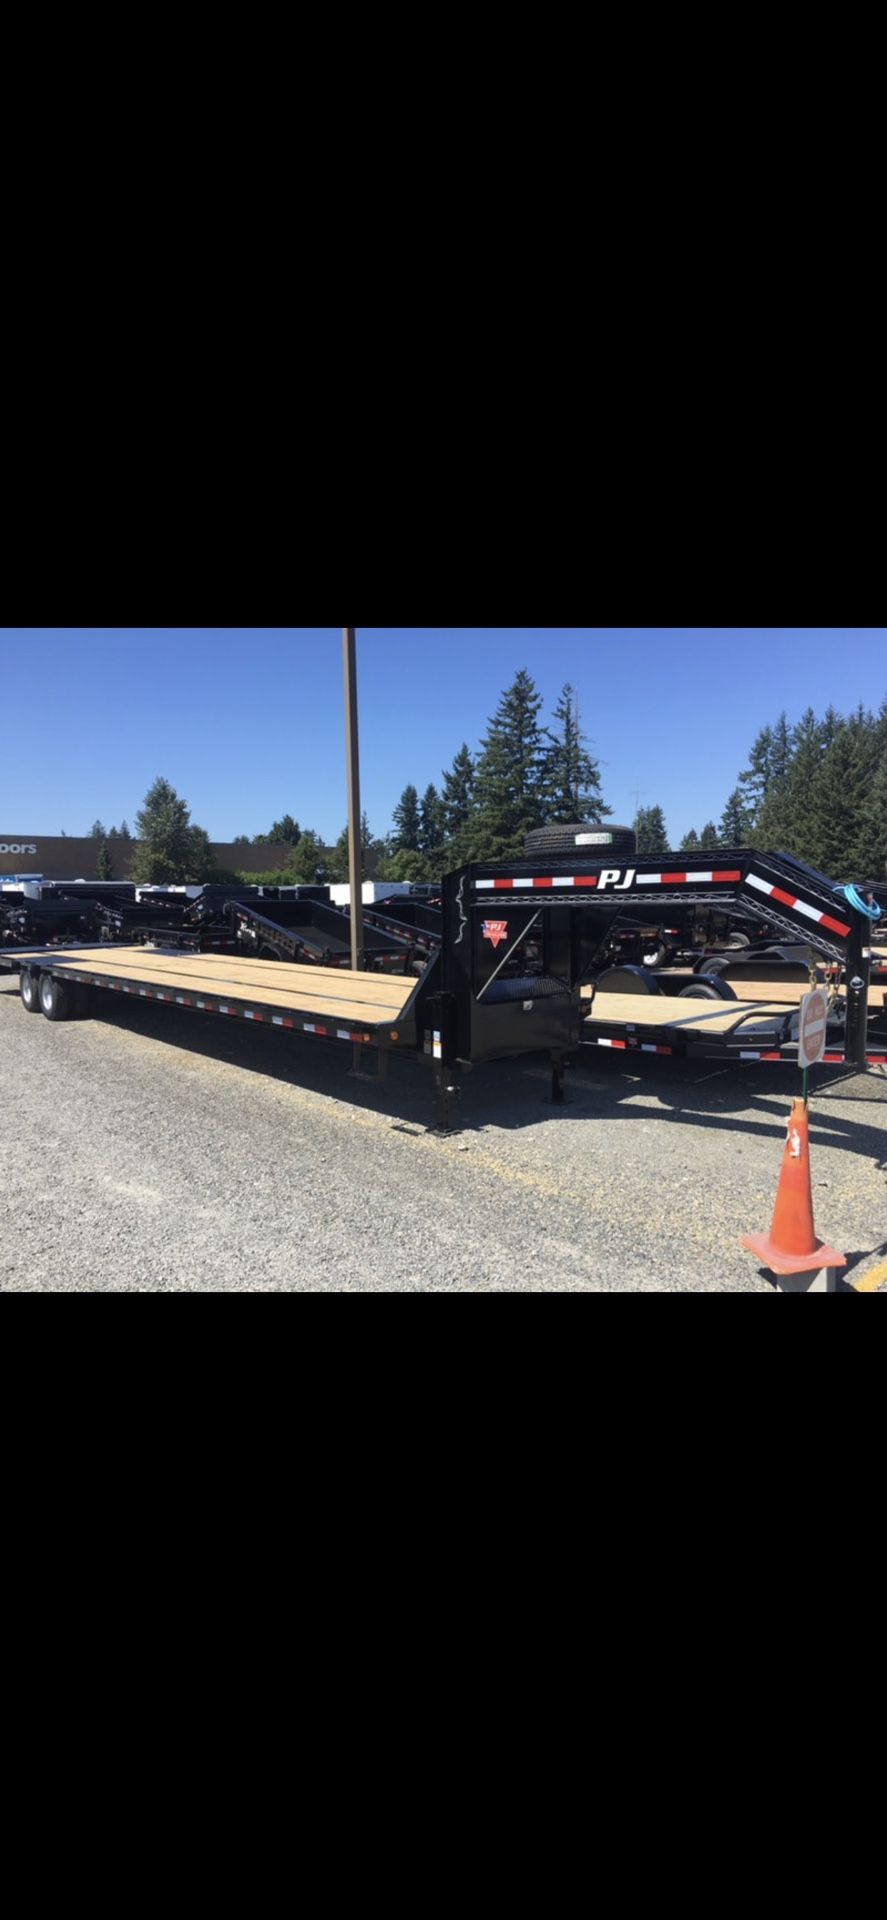 2019 40’ dually tandem axle PJ with monster ramps